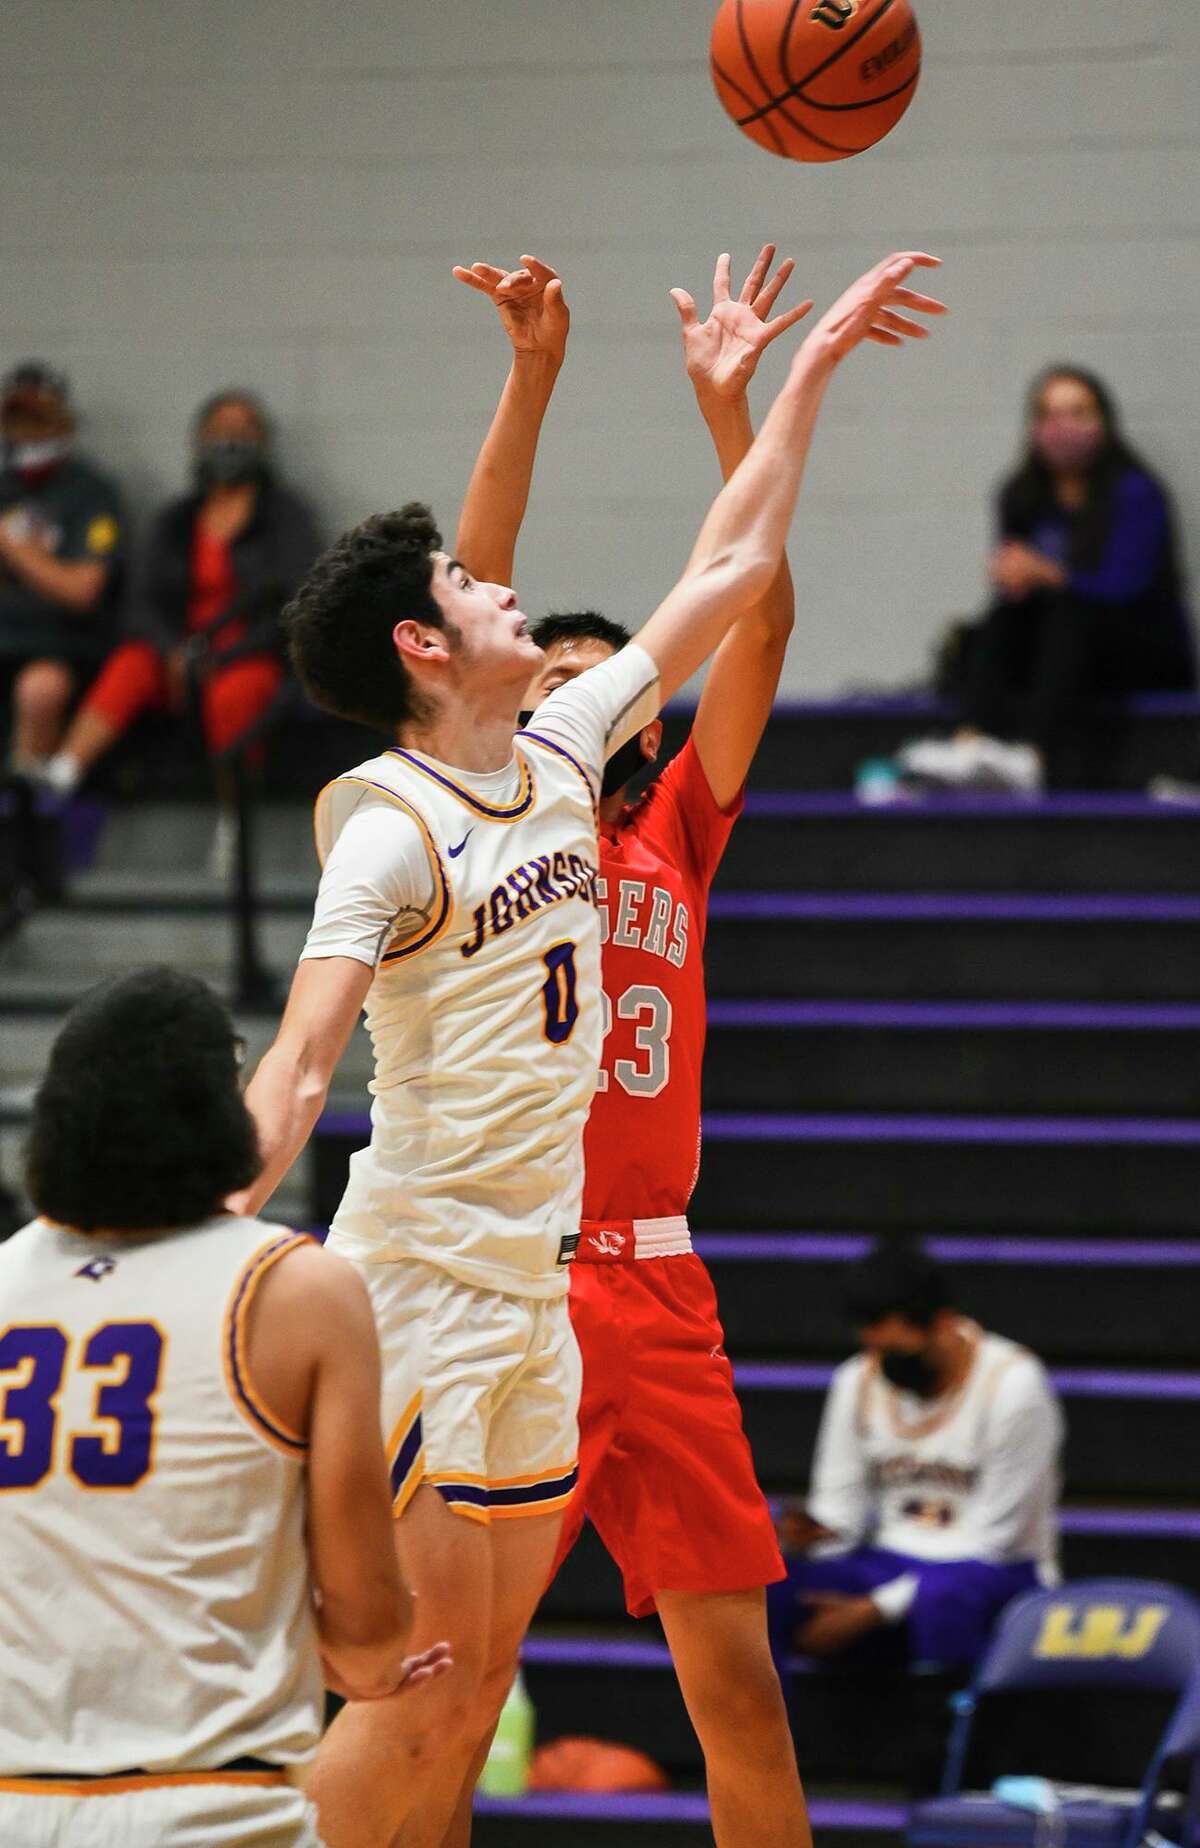 Rogelio Leyendecker and LBJ rallied for a 47-45 victory Wednesday at Hidalgo.